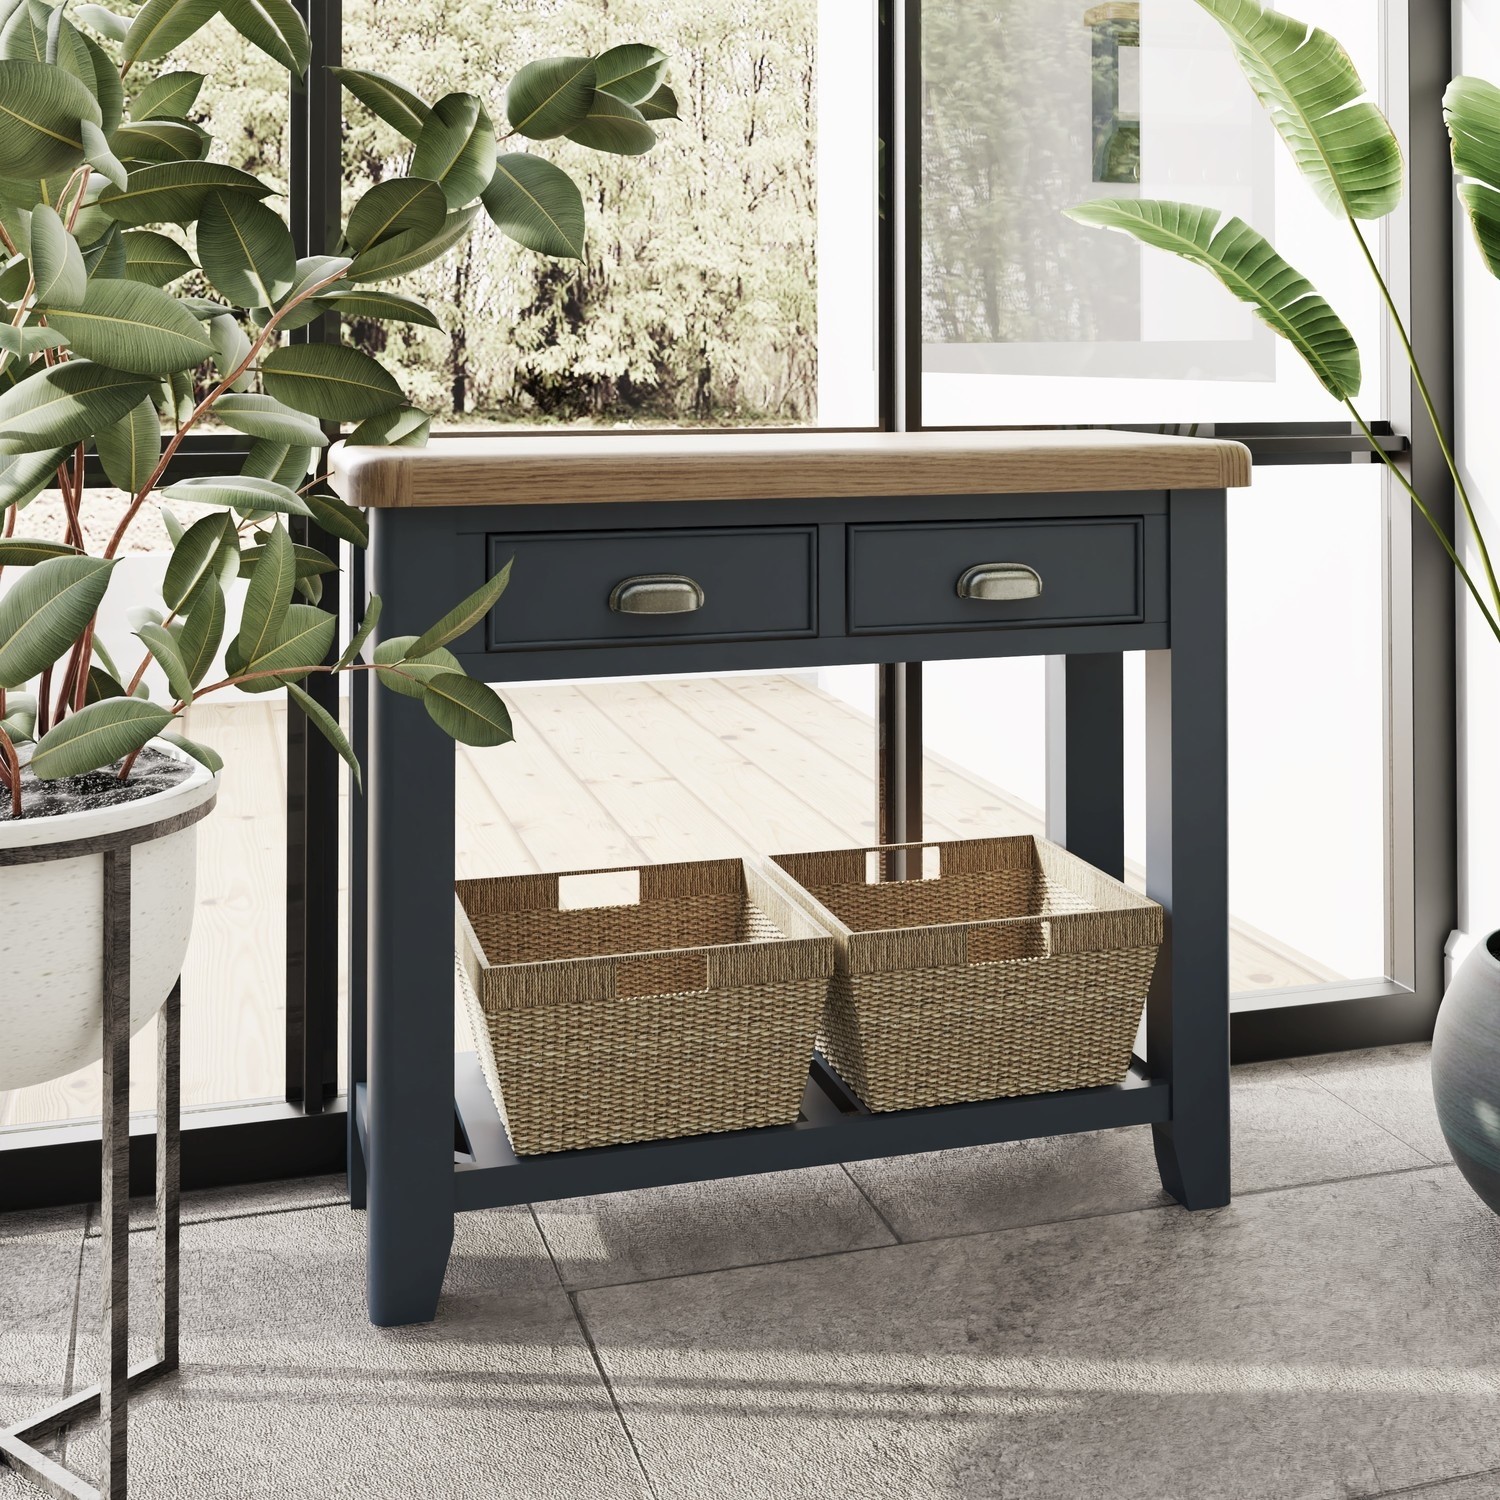 Photo of Oak & blue console table with wicker baskets